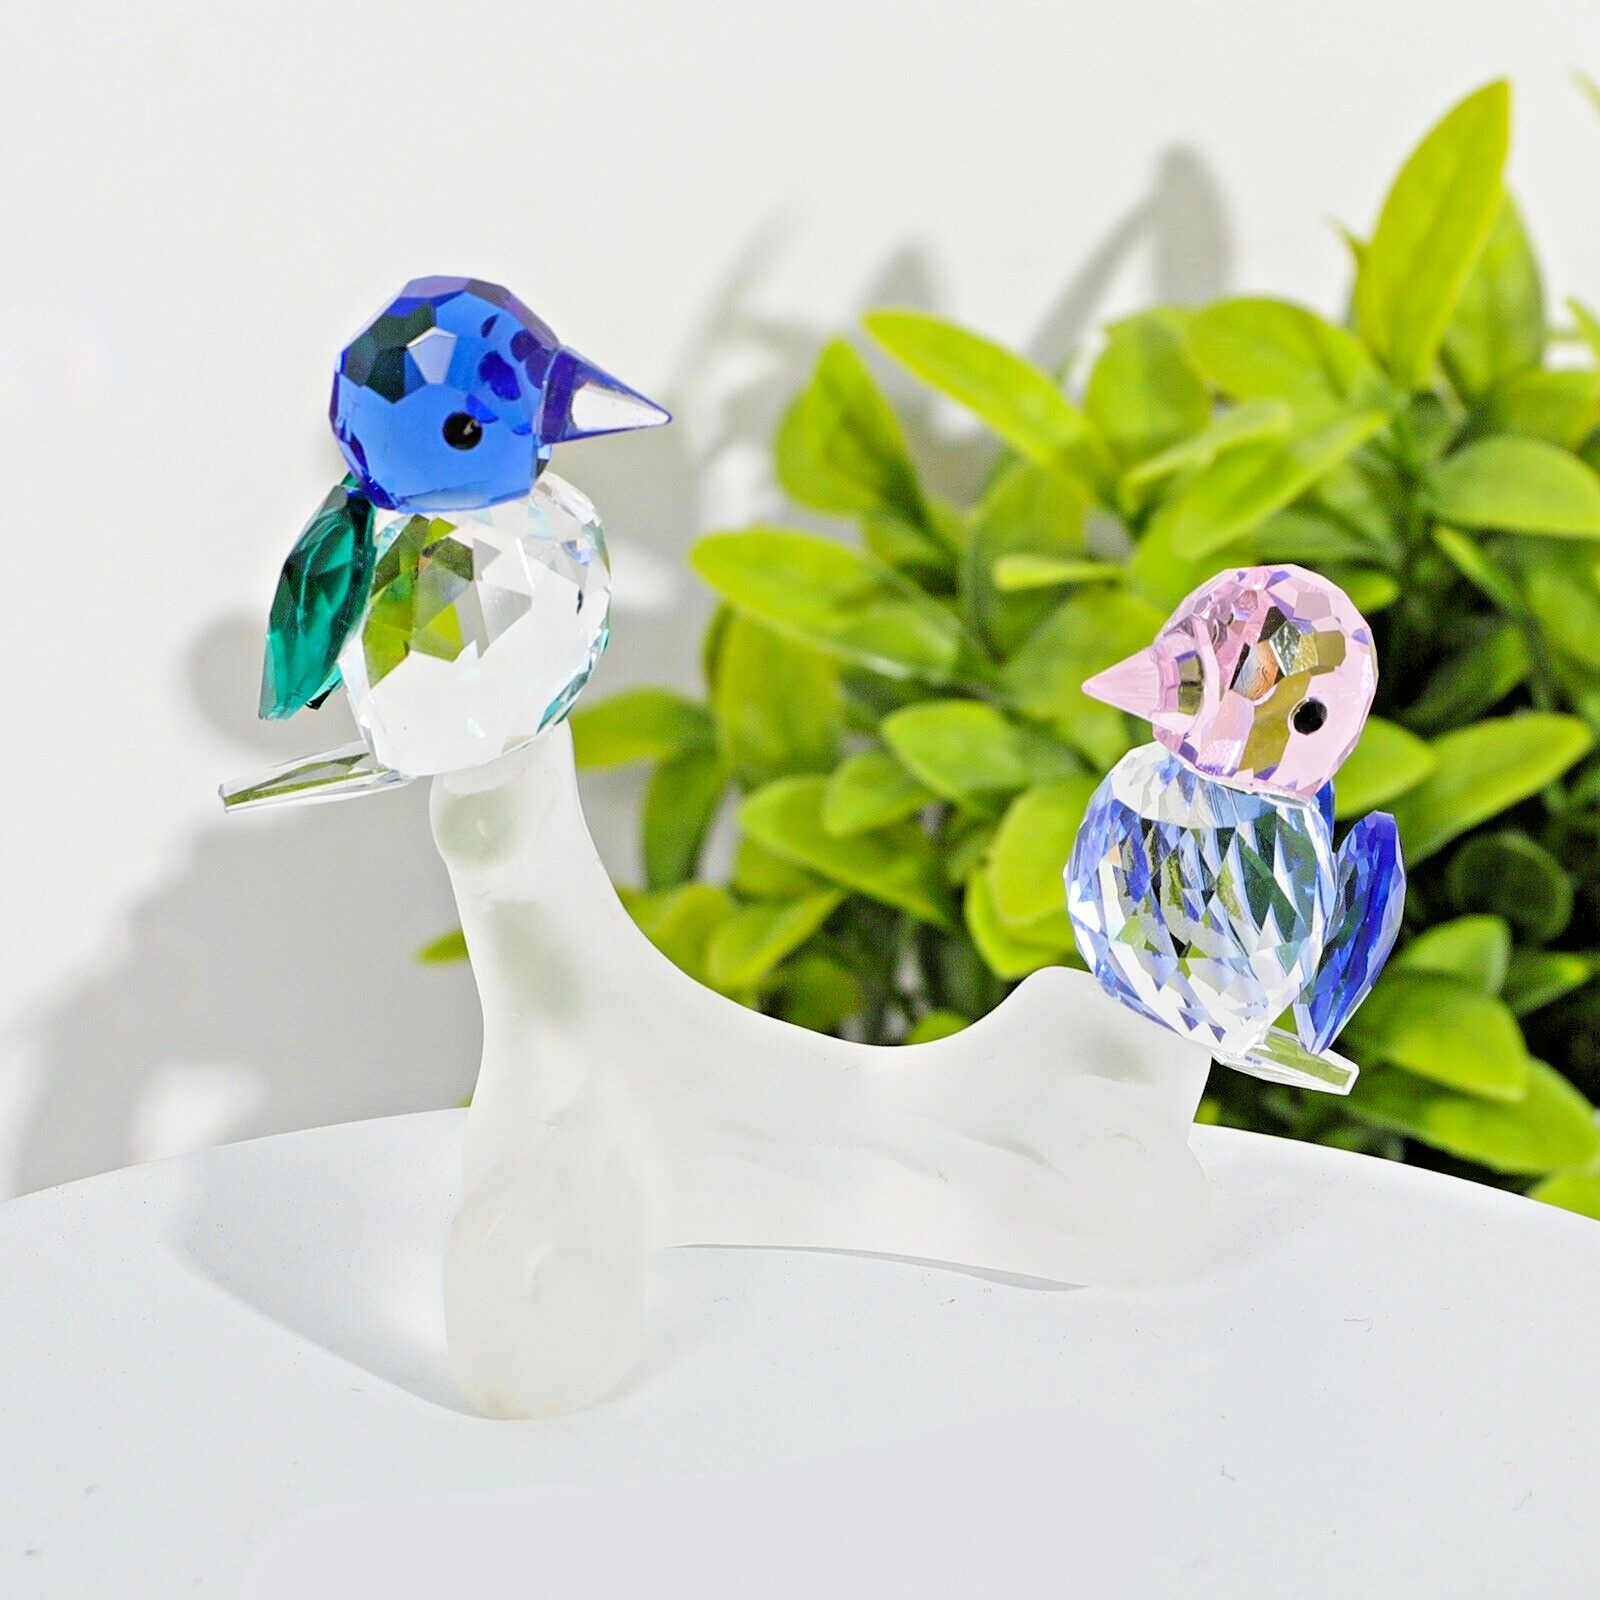 Crystal Birds Table Home Decoration Figurine Ornament Blue and Pink Bird